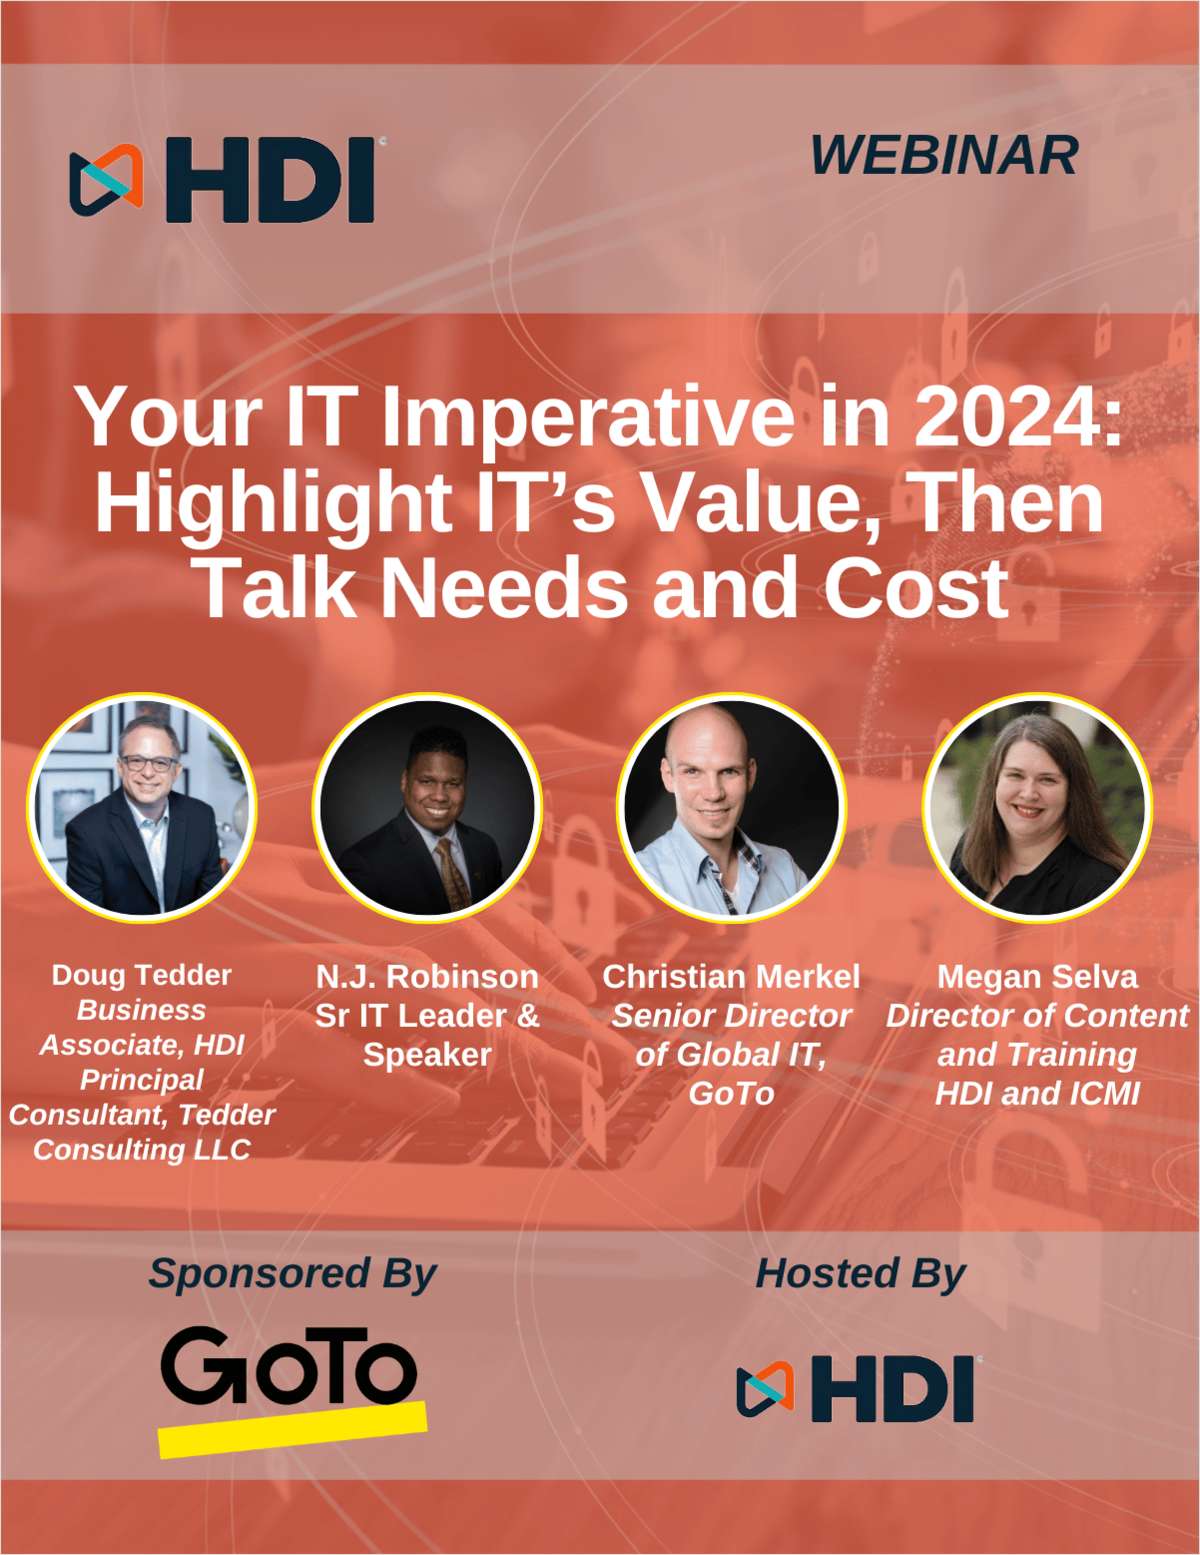 Your IT Imperative in 2024: Highlight IT's Value, Then Talk Needs and Cost